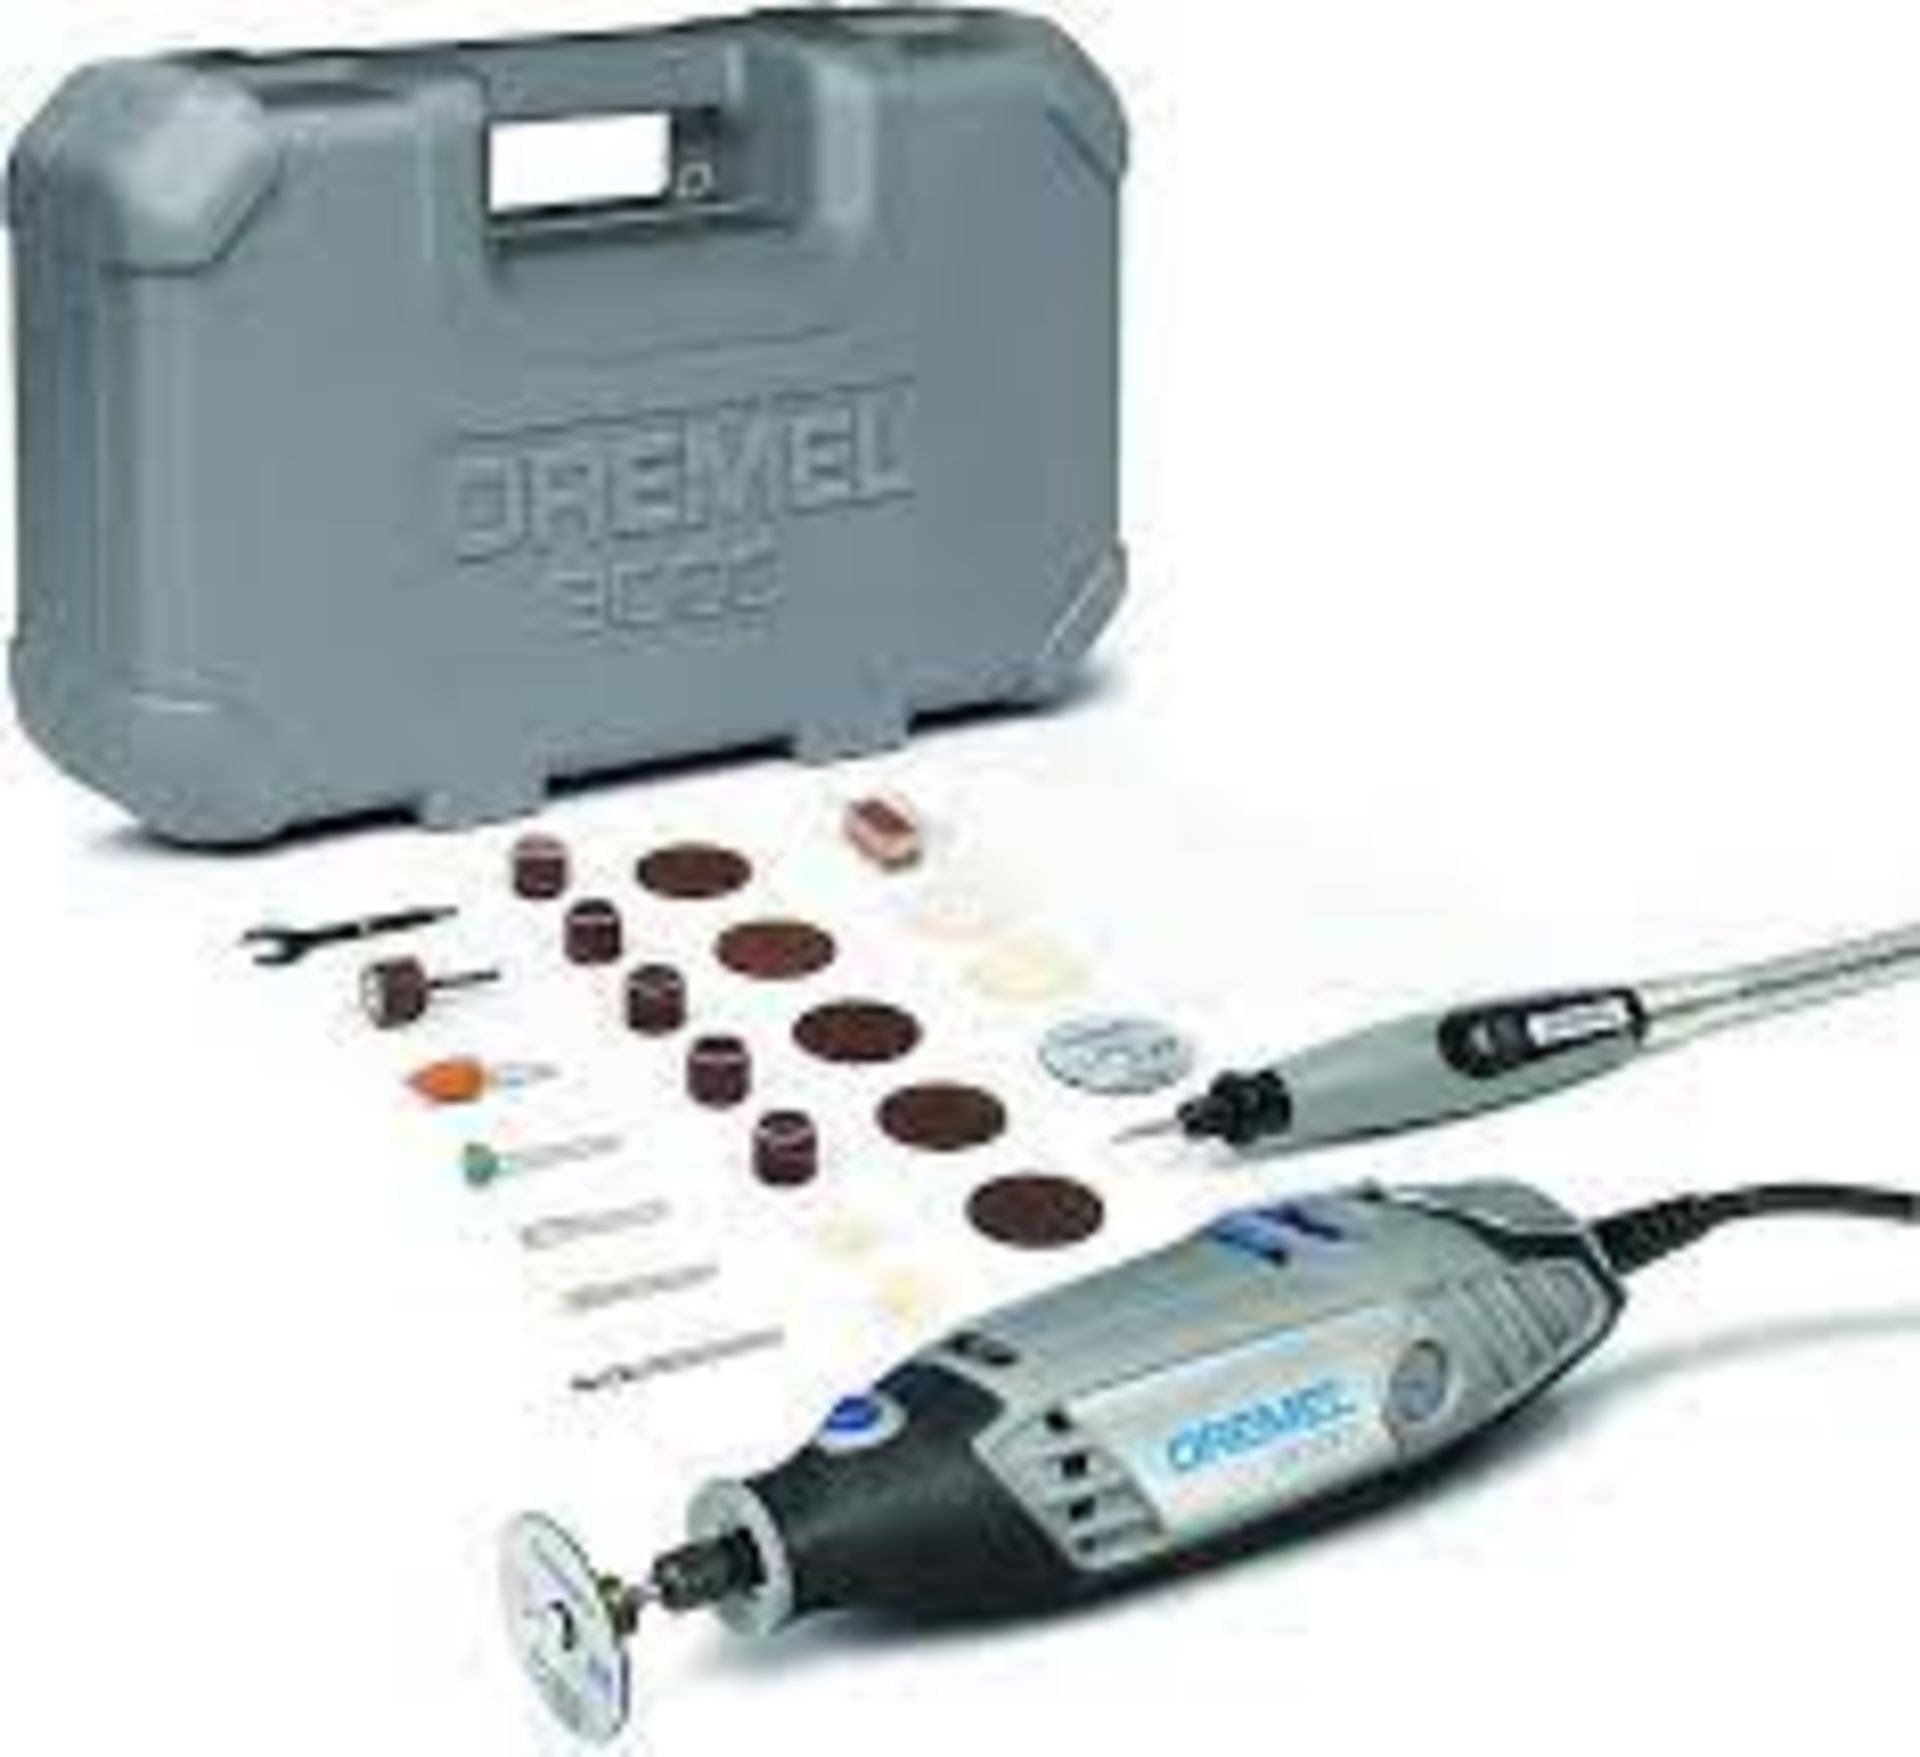 Dremel 3000-1/25 Rotary Tool 1 Attachment + 25 AccMost popular Multi-Tool. Work on your DIY projects